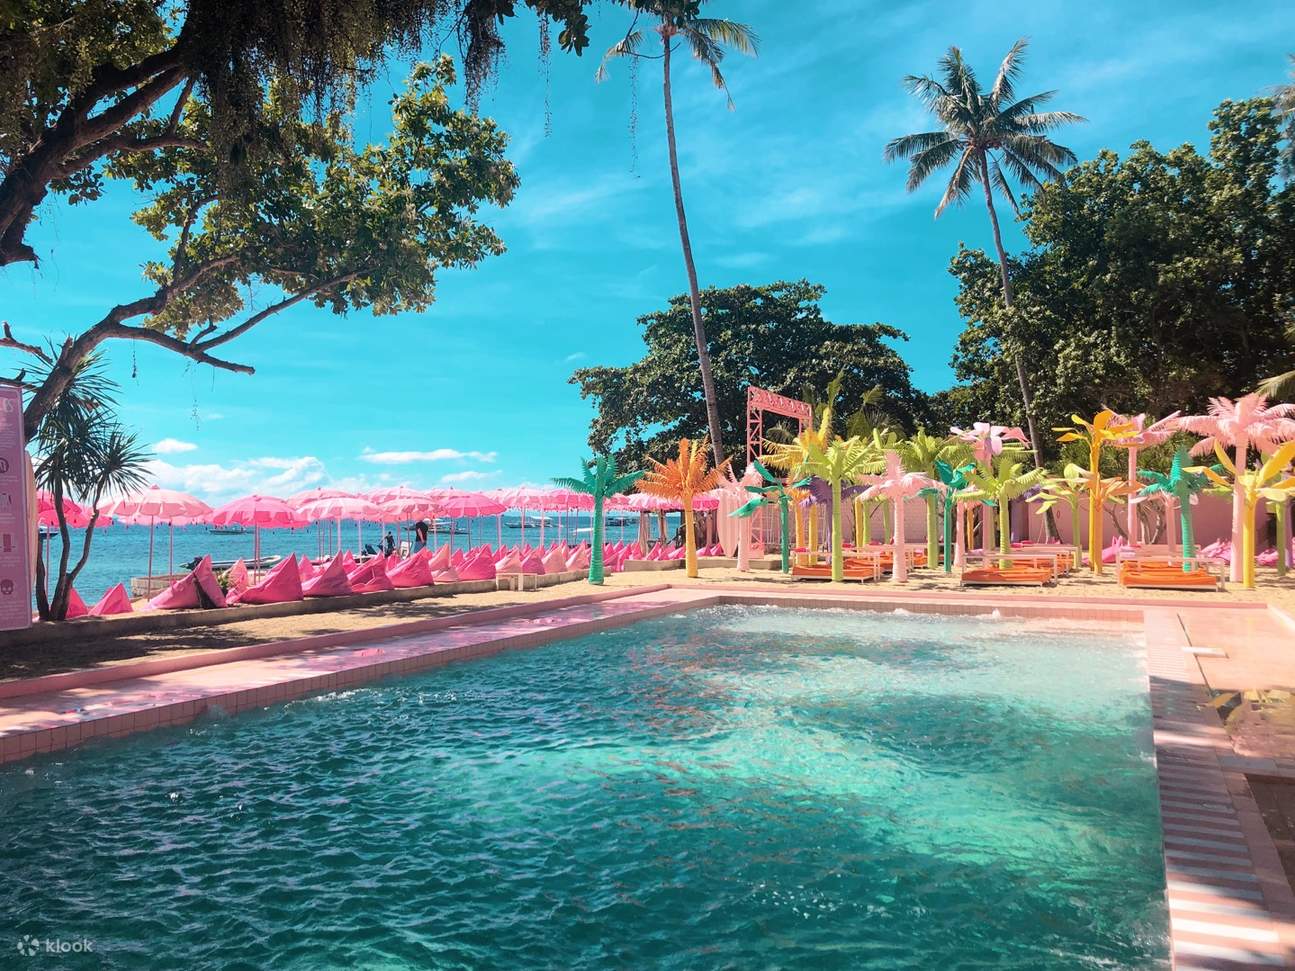 pink pool inflatable park happy beach